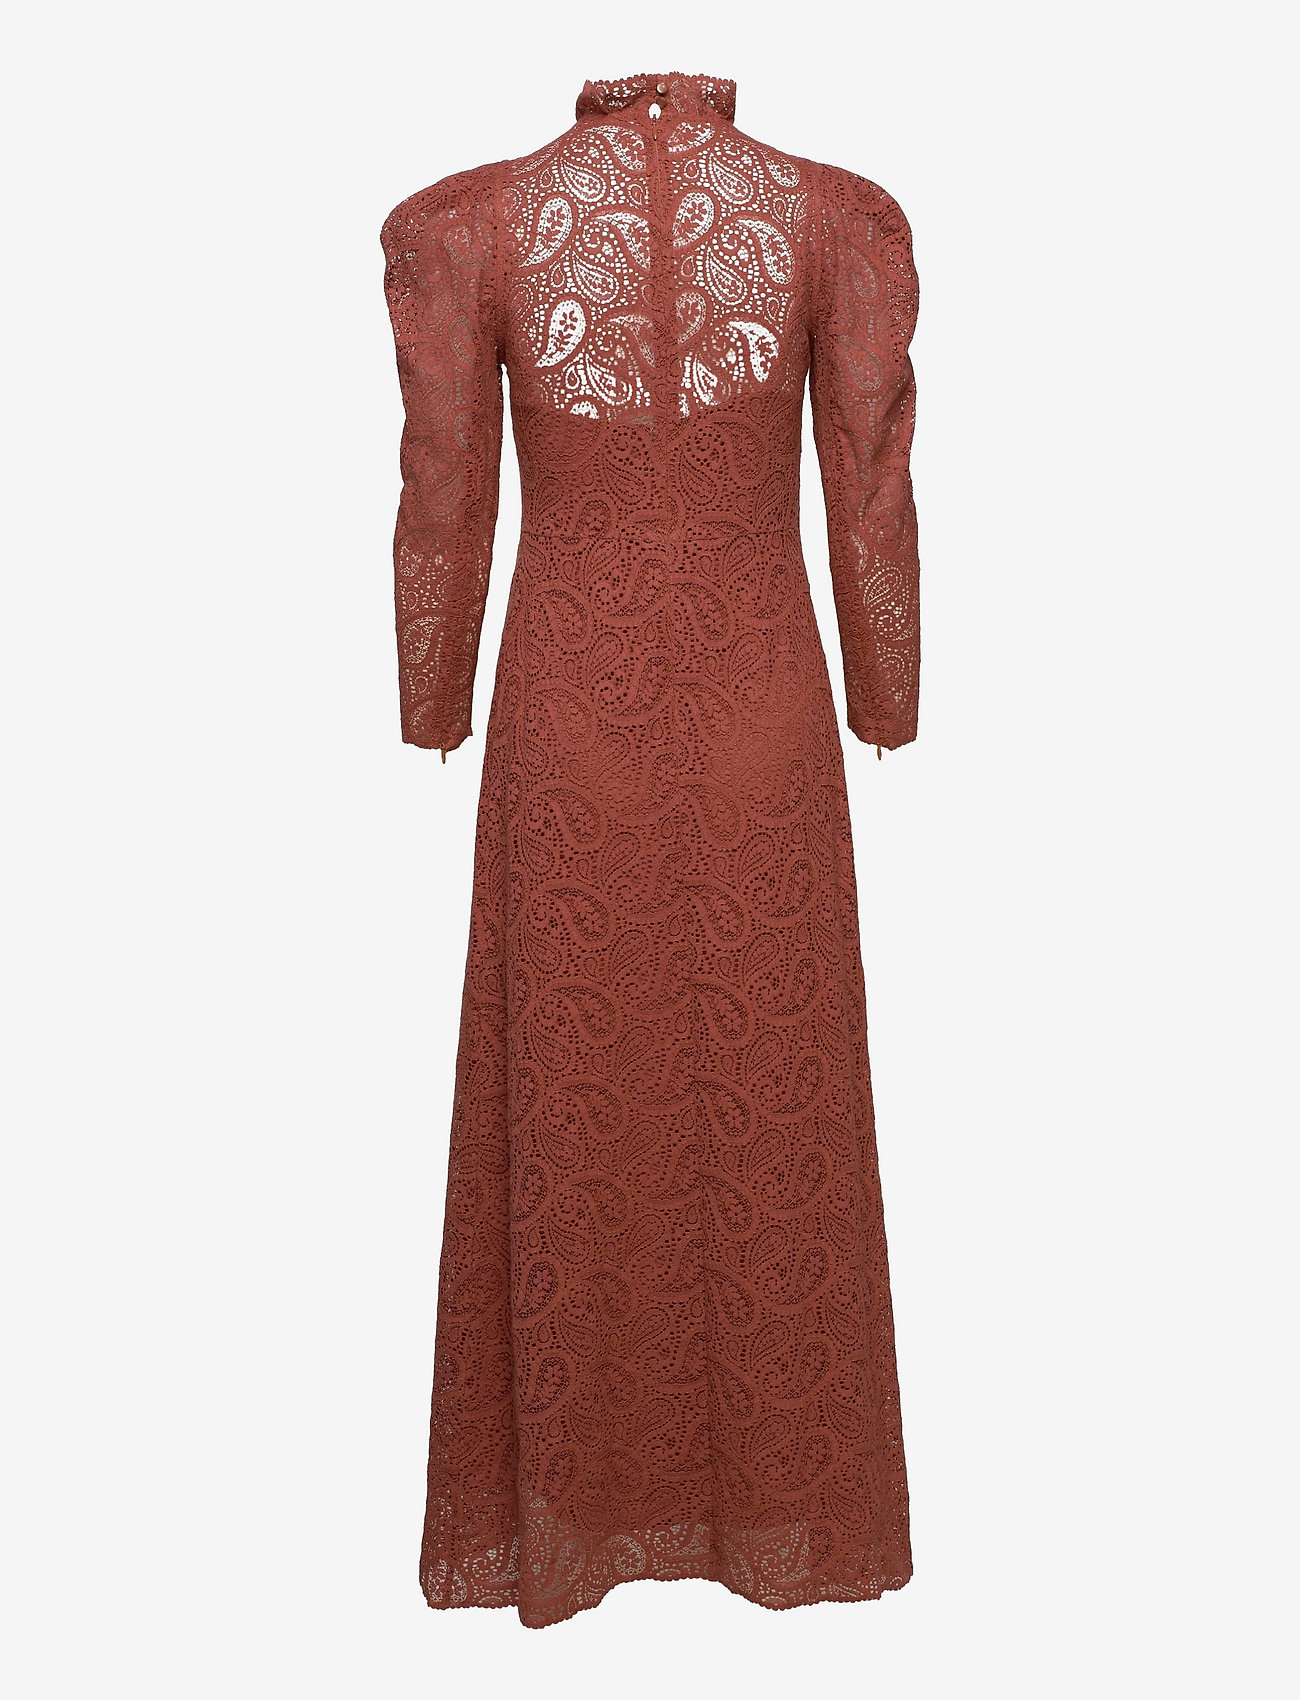 IVY OAK - DUA Dresses - party wear at outlet prices - mahogany - 1